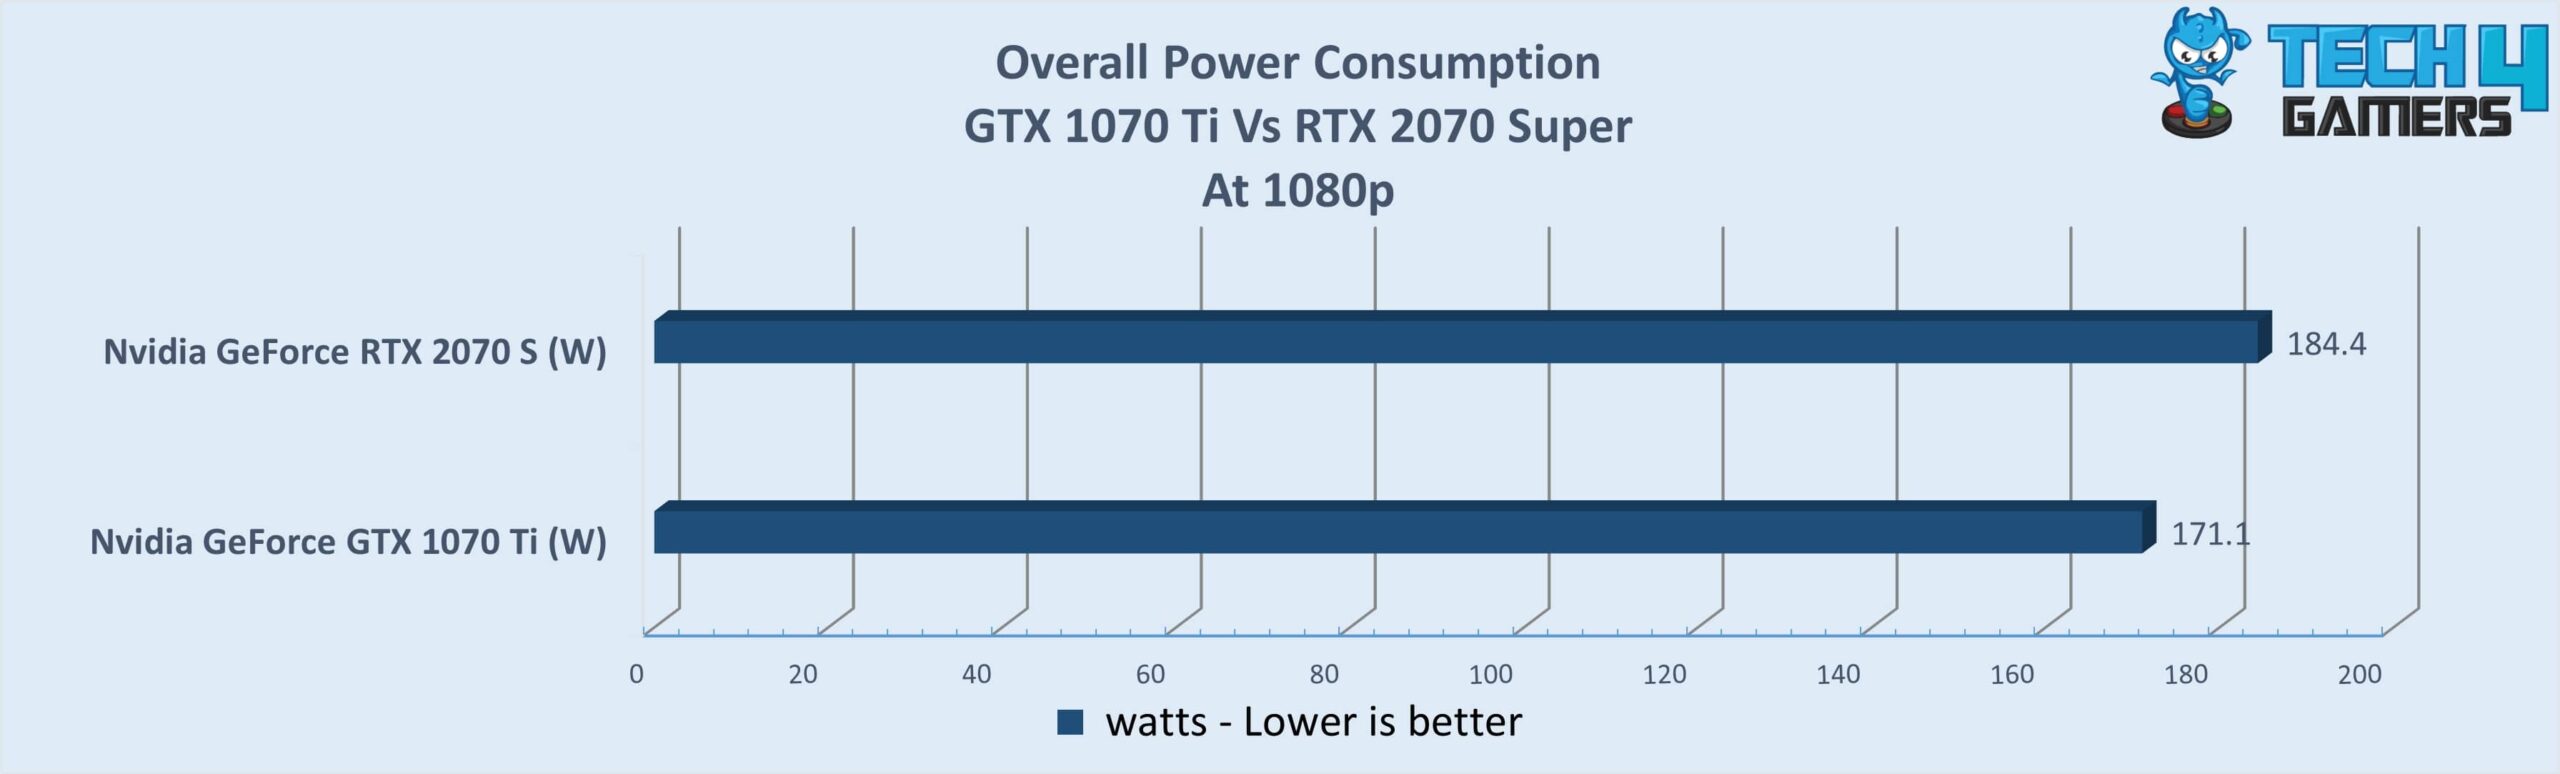 Overall Power Consumption of two GPUs at 1080p